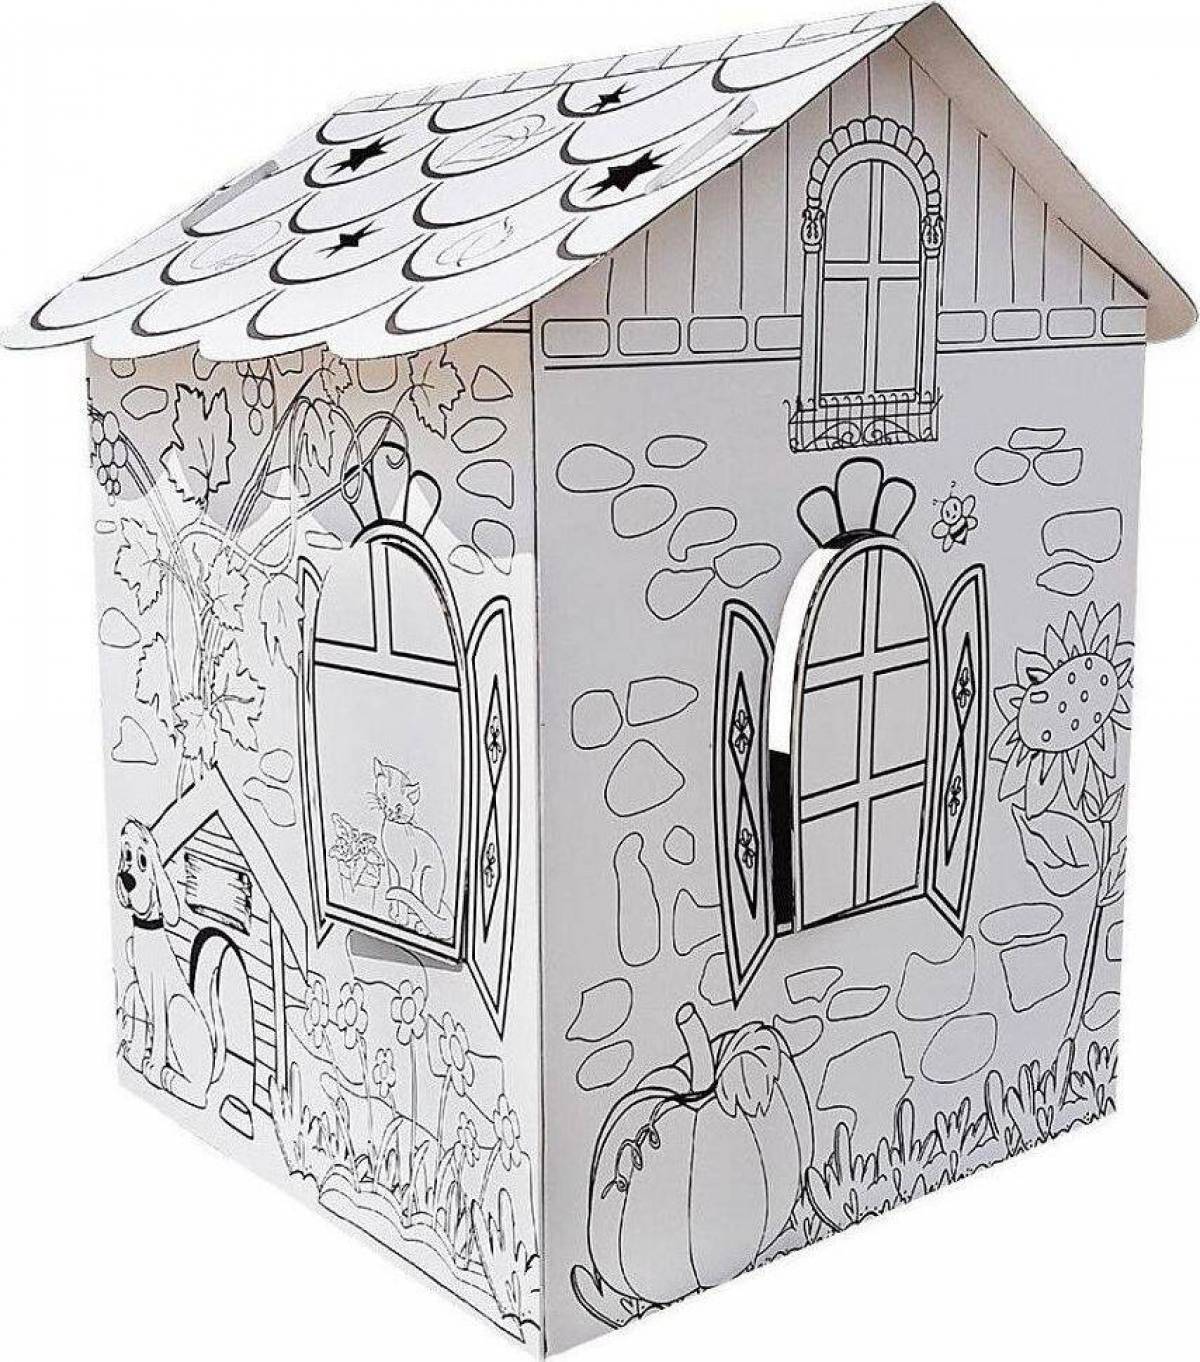 Coloring page cheerful cardboard house